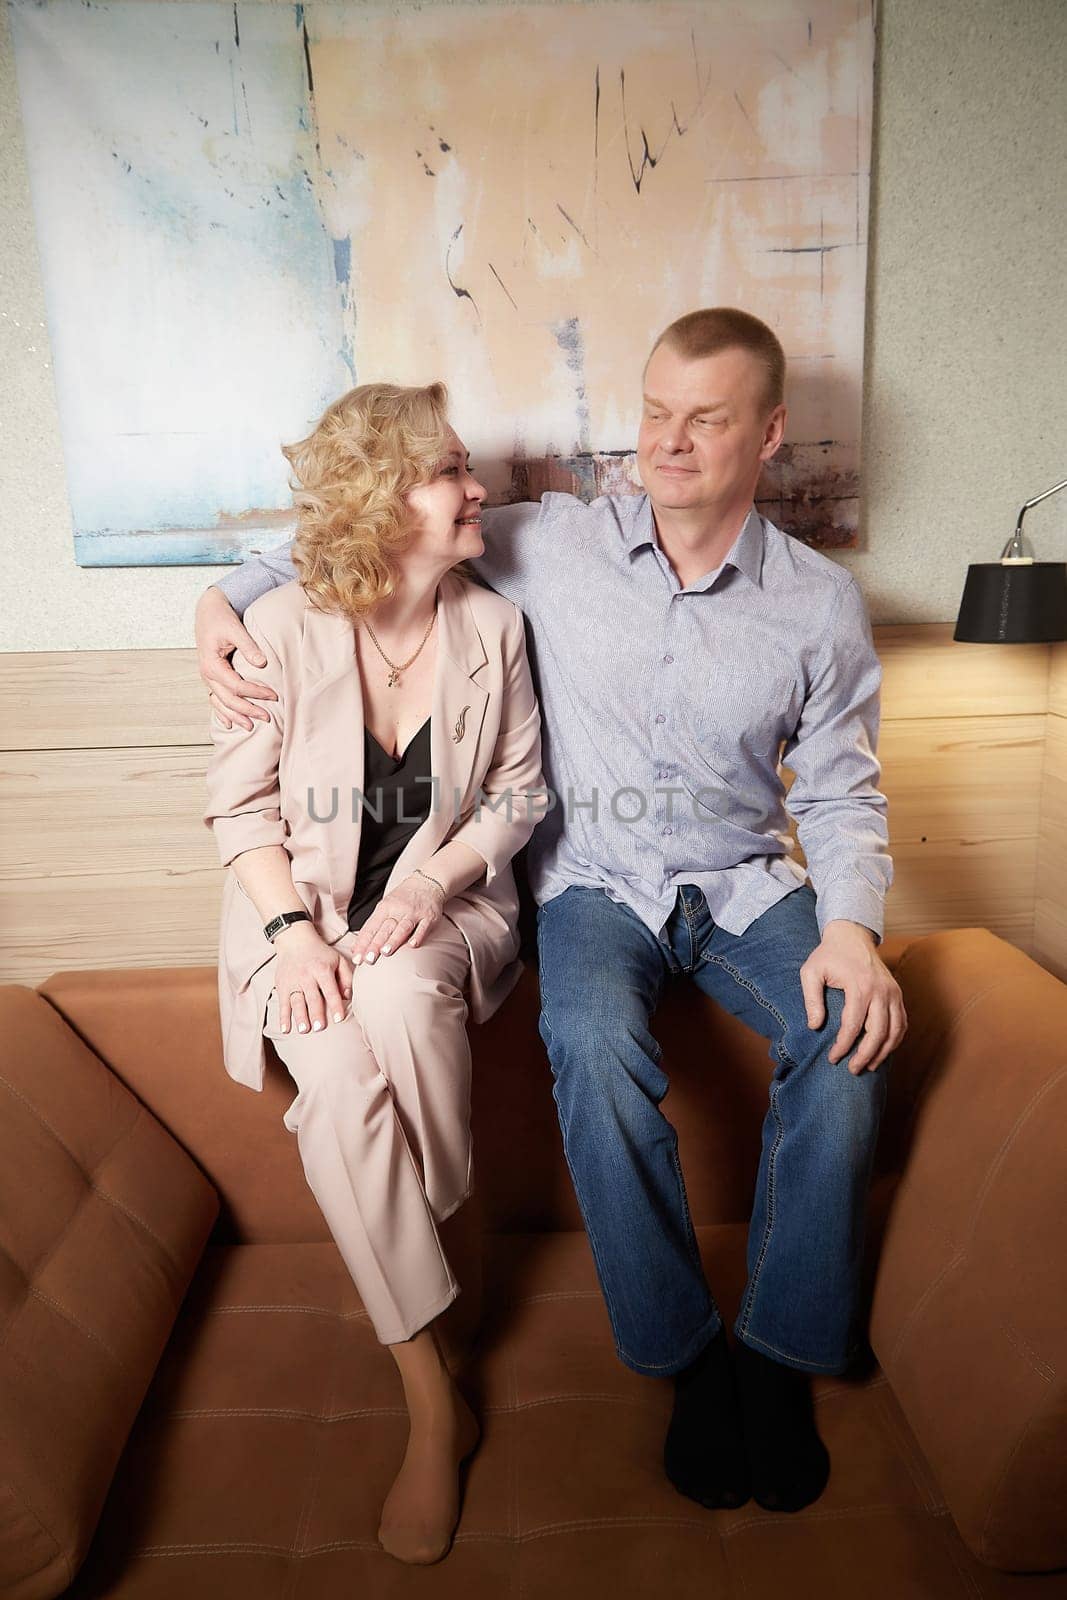 Loving adult couple communicates and embraces privately in the living room or in hotel. Woman is wearing business formal suit and man is wearing jeans and a shirt, indicating a close relationship